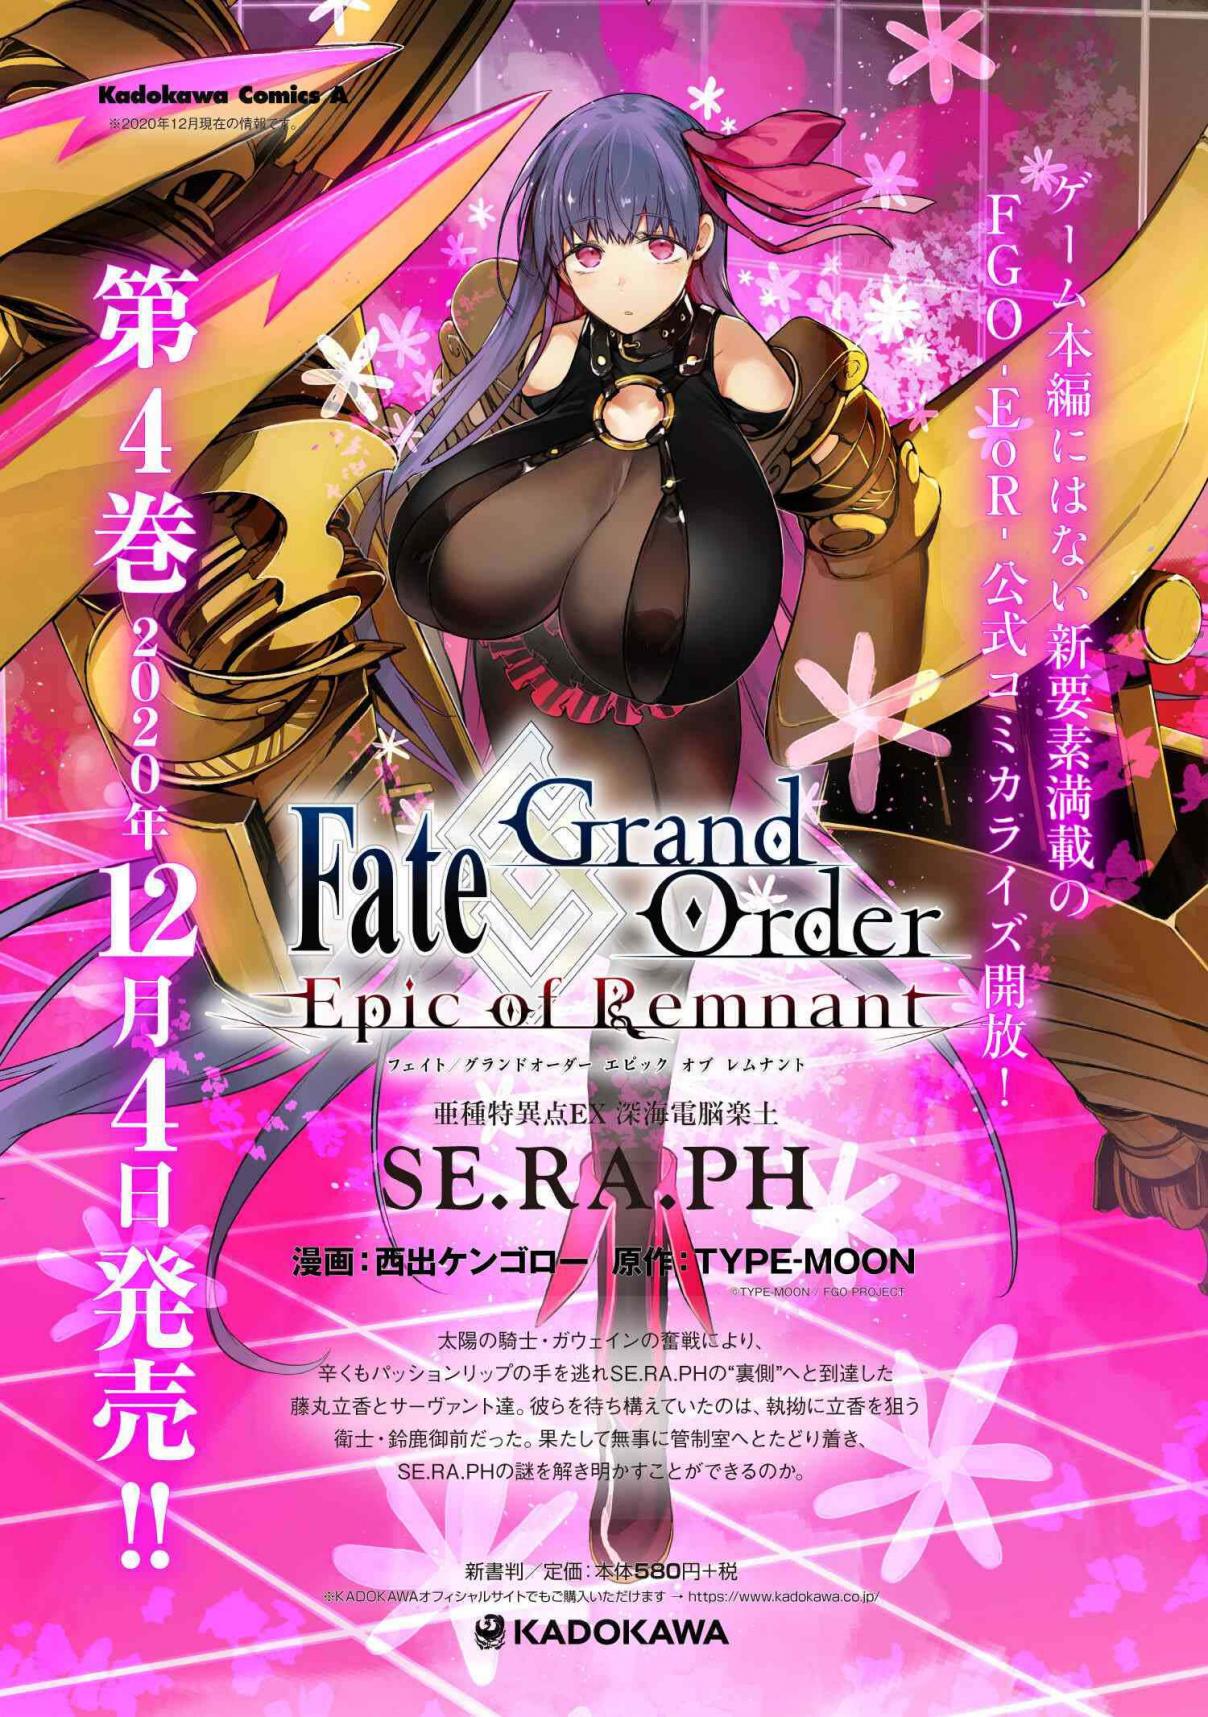 Fate/Grand Order -Epic of Remnant- Deep Sea Cyber-Paradise, SE.RA.PH 20.1